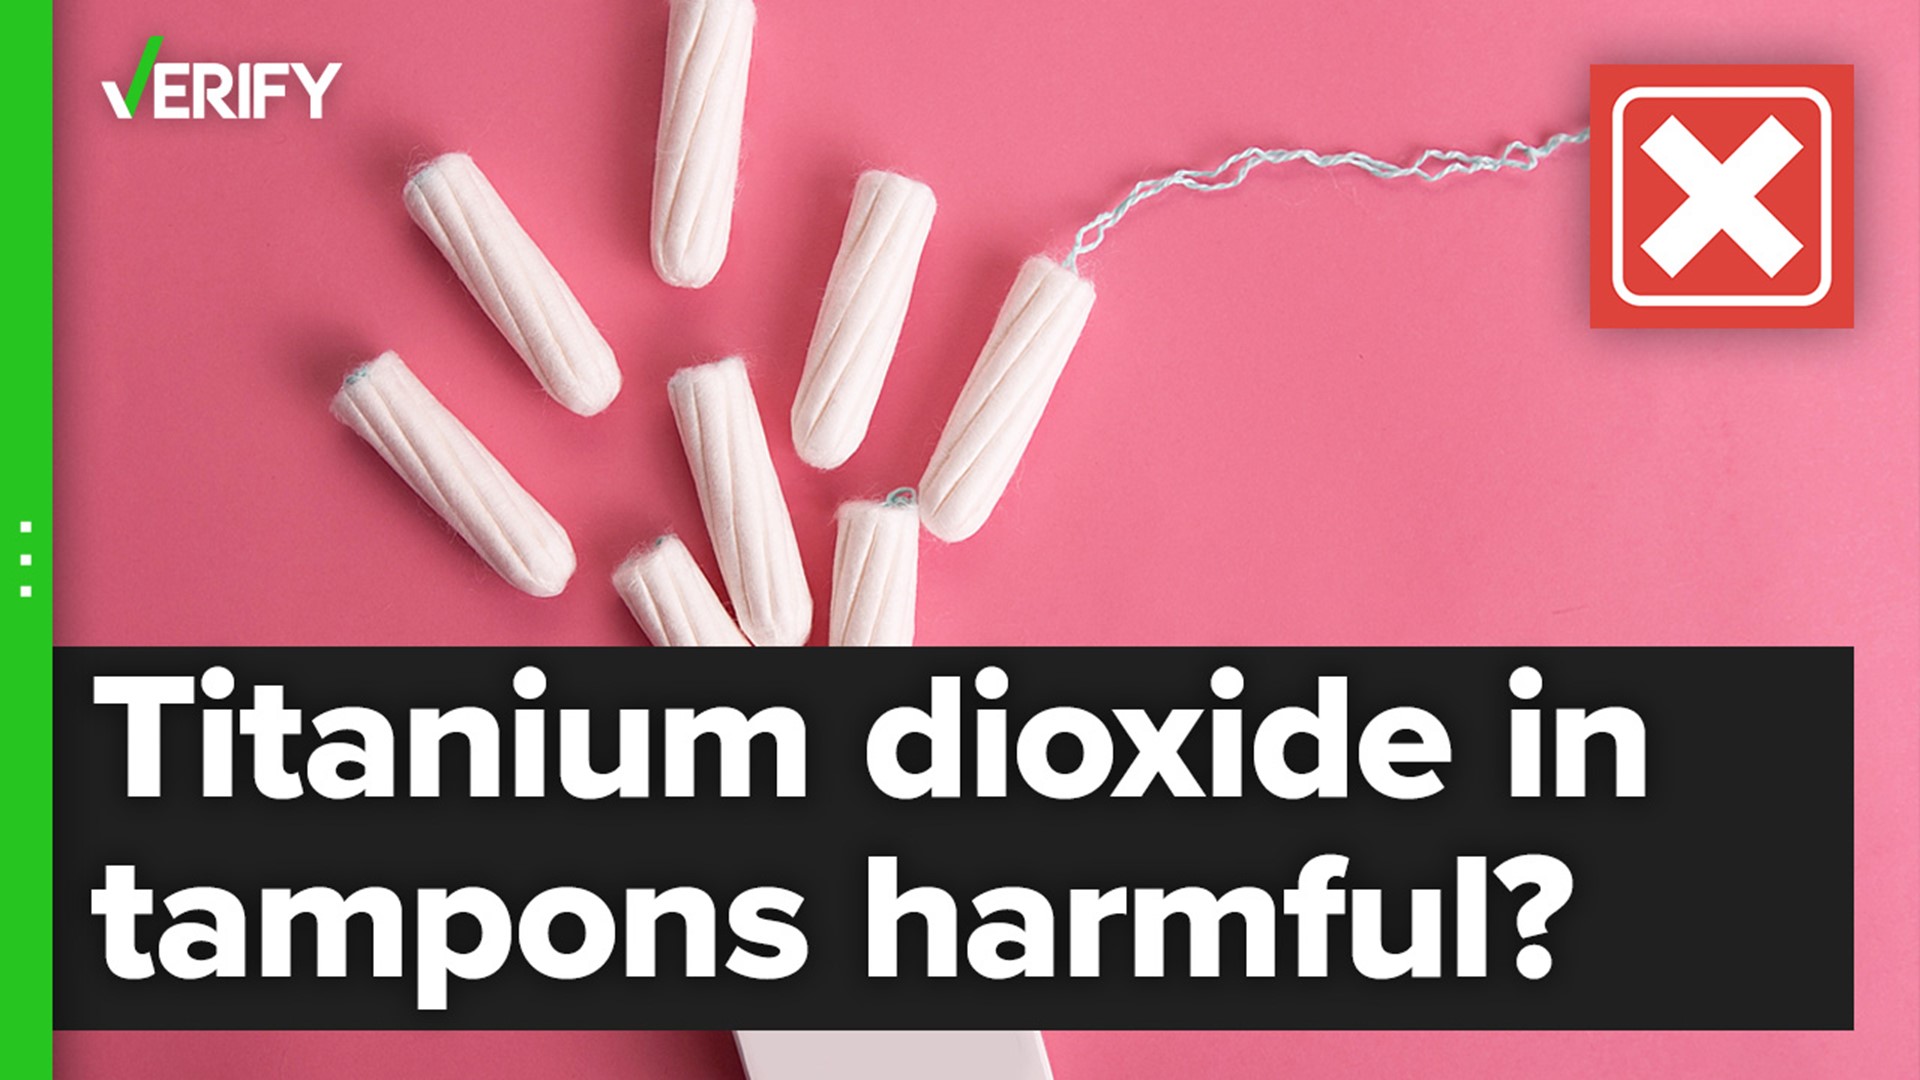 Studies on titanium dioxide toxicity analyzed rats breathing in the chemical, not humans using it in tampons.